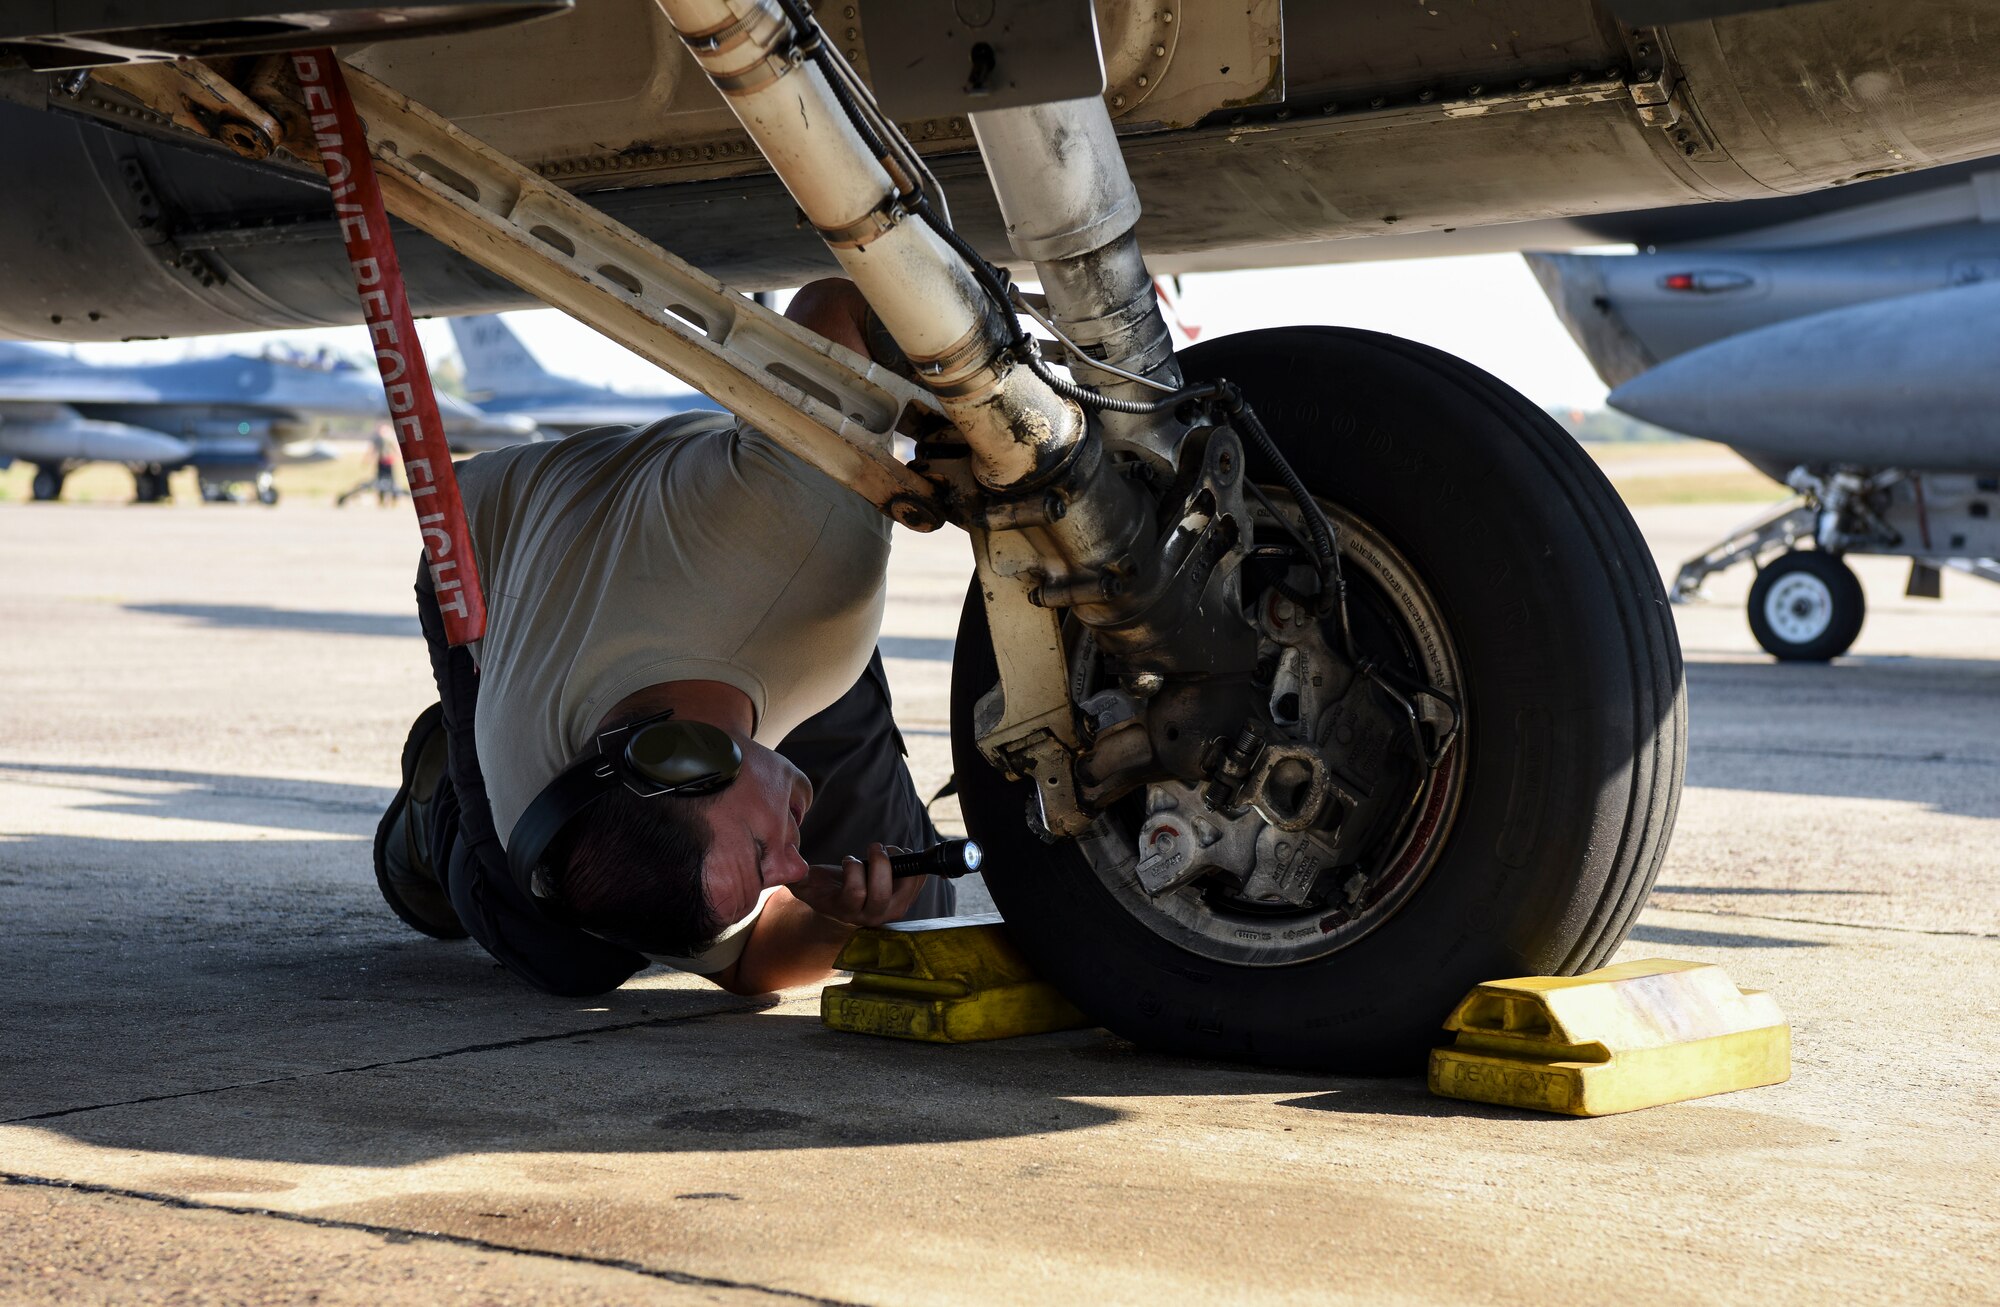 U.S. Air Force Staff Sgt. Travis Davis, 8th Aircraft Maintenance Squadron crew chief, inspects a USAF F-16 Fighting Falcon brake during Exercise Cobra Gold 2019 at Korat Royal Thai Air Force Base, Thailand, Feb. 19, 2019. Cobra Gold provides a venue for both U.S. and partner nations to advance interoperability and increase partner capacity in planning and executing complex and realistic multinational force and combined task force operations. (U.S. Air Force photo by Senior Airman Savannah L. Waters)